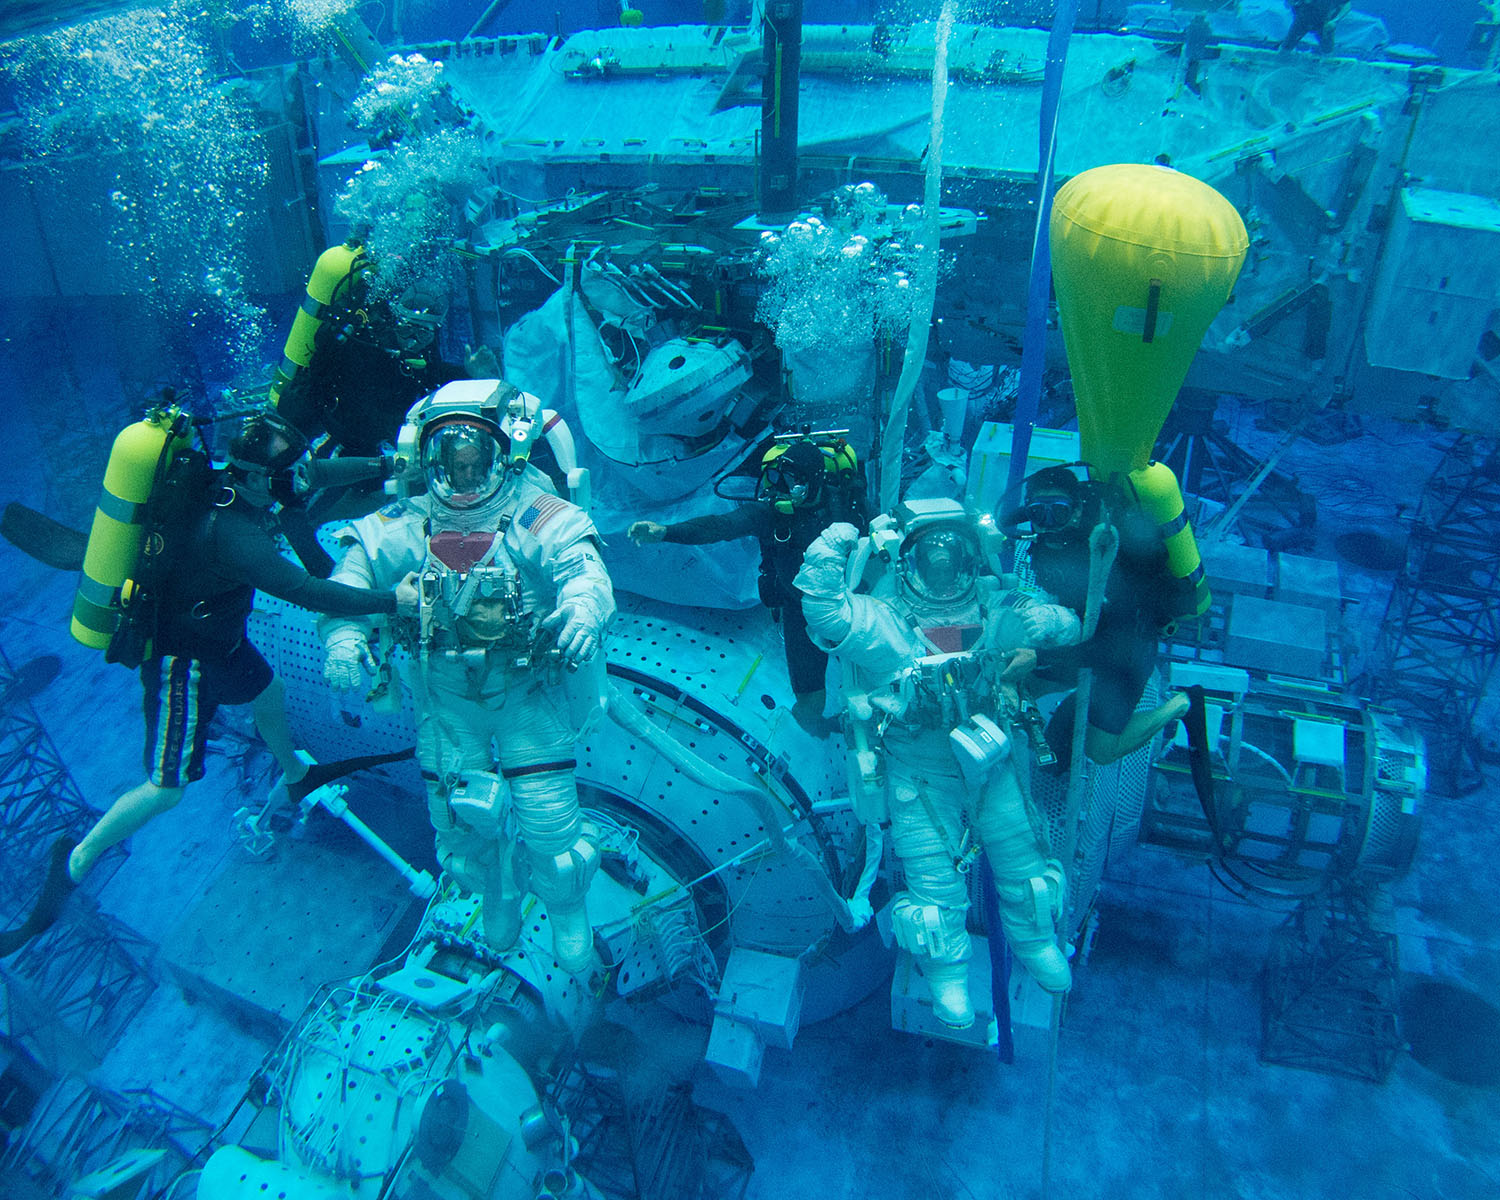 Scott Tingle (right) training with fellow astronaut Steve Swanson at NASA's Neutral Buoyancy Lab, the largest swimming pool in the world. <br>Photo Credit: NASA